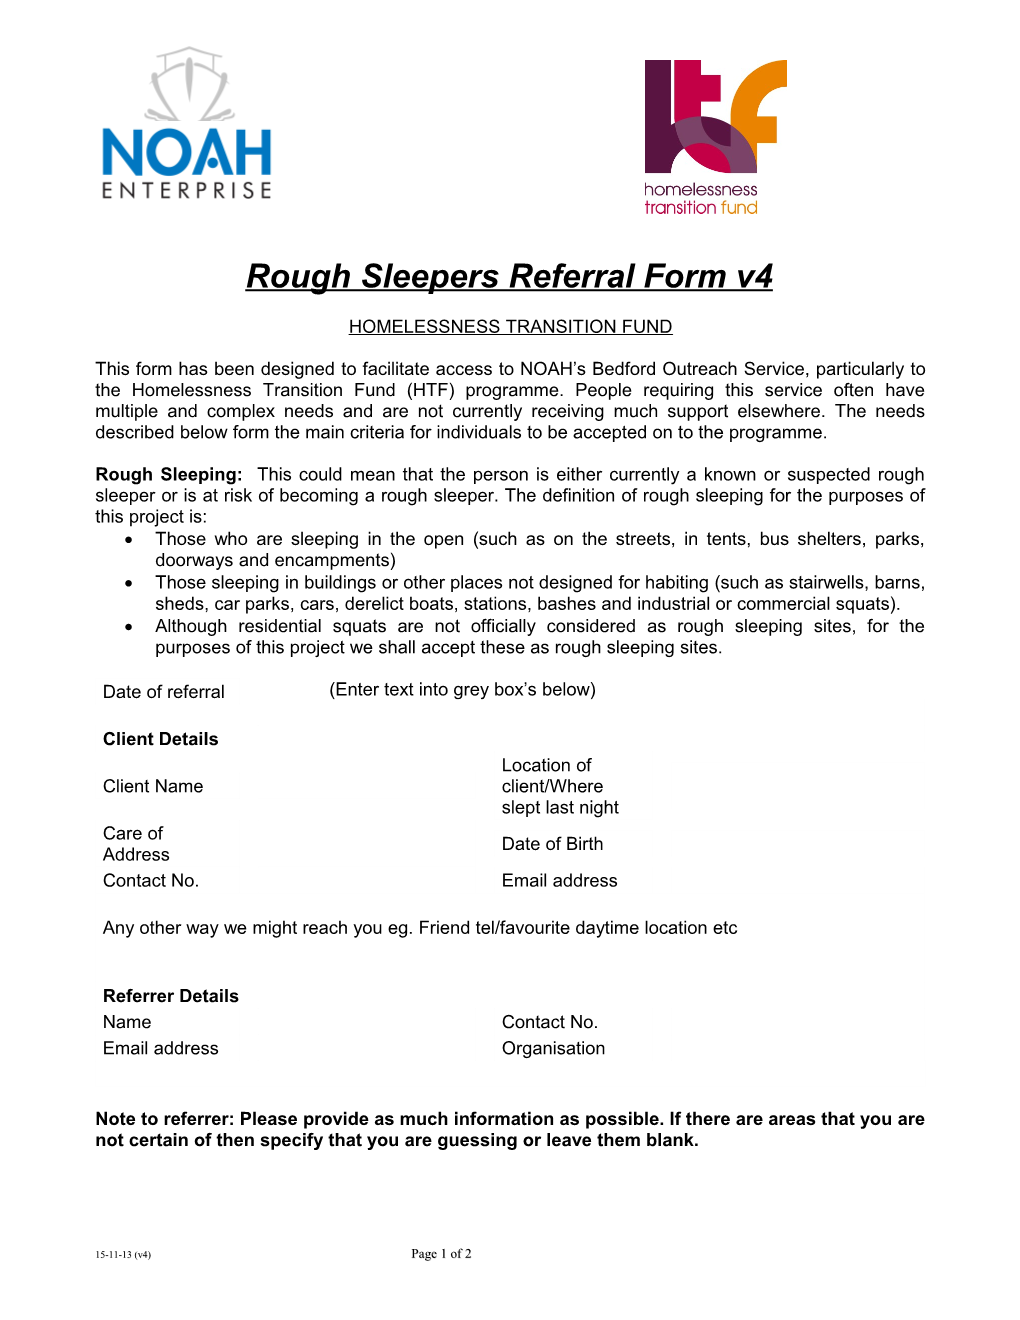 Rough Sleepers Referral Form V4